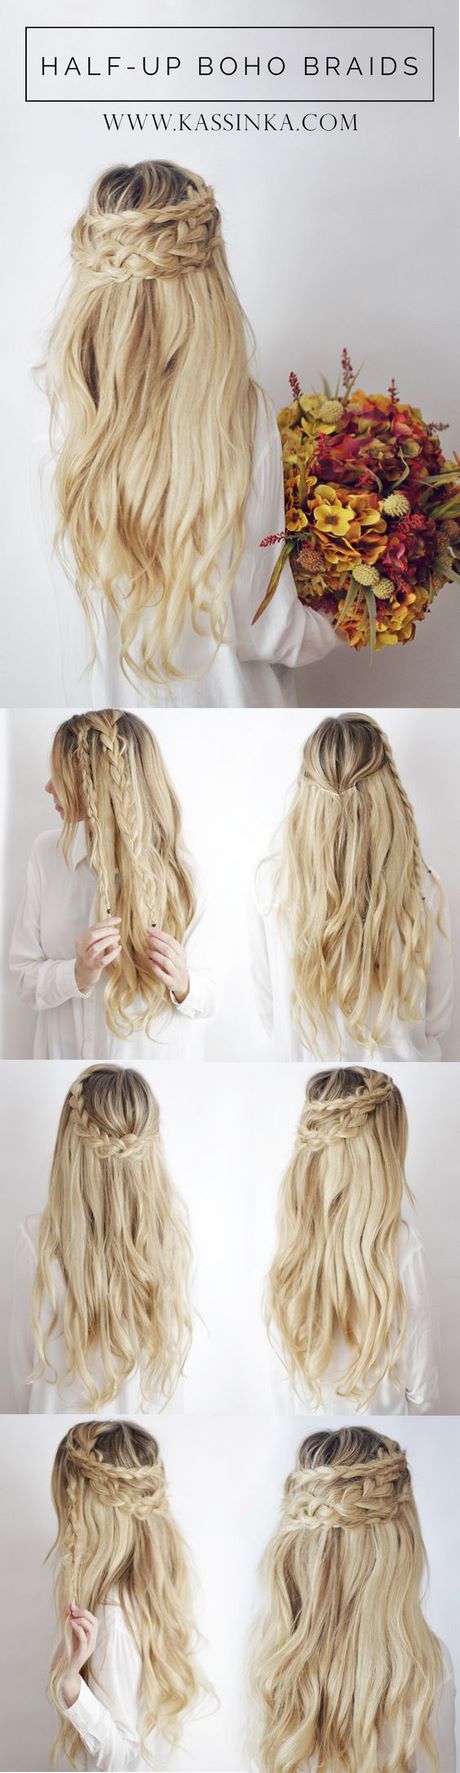 Home hairstyles for long hair home-hairstyles-for-long-hair-41_5